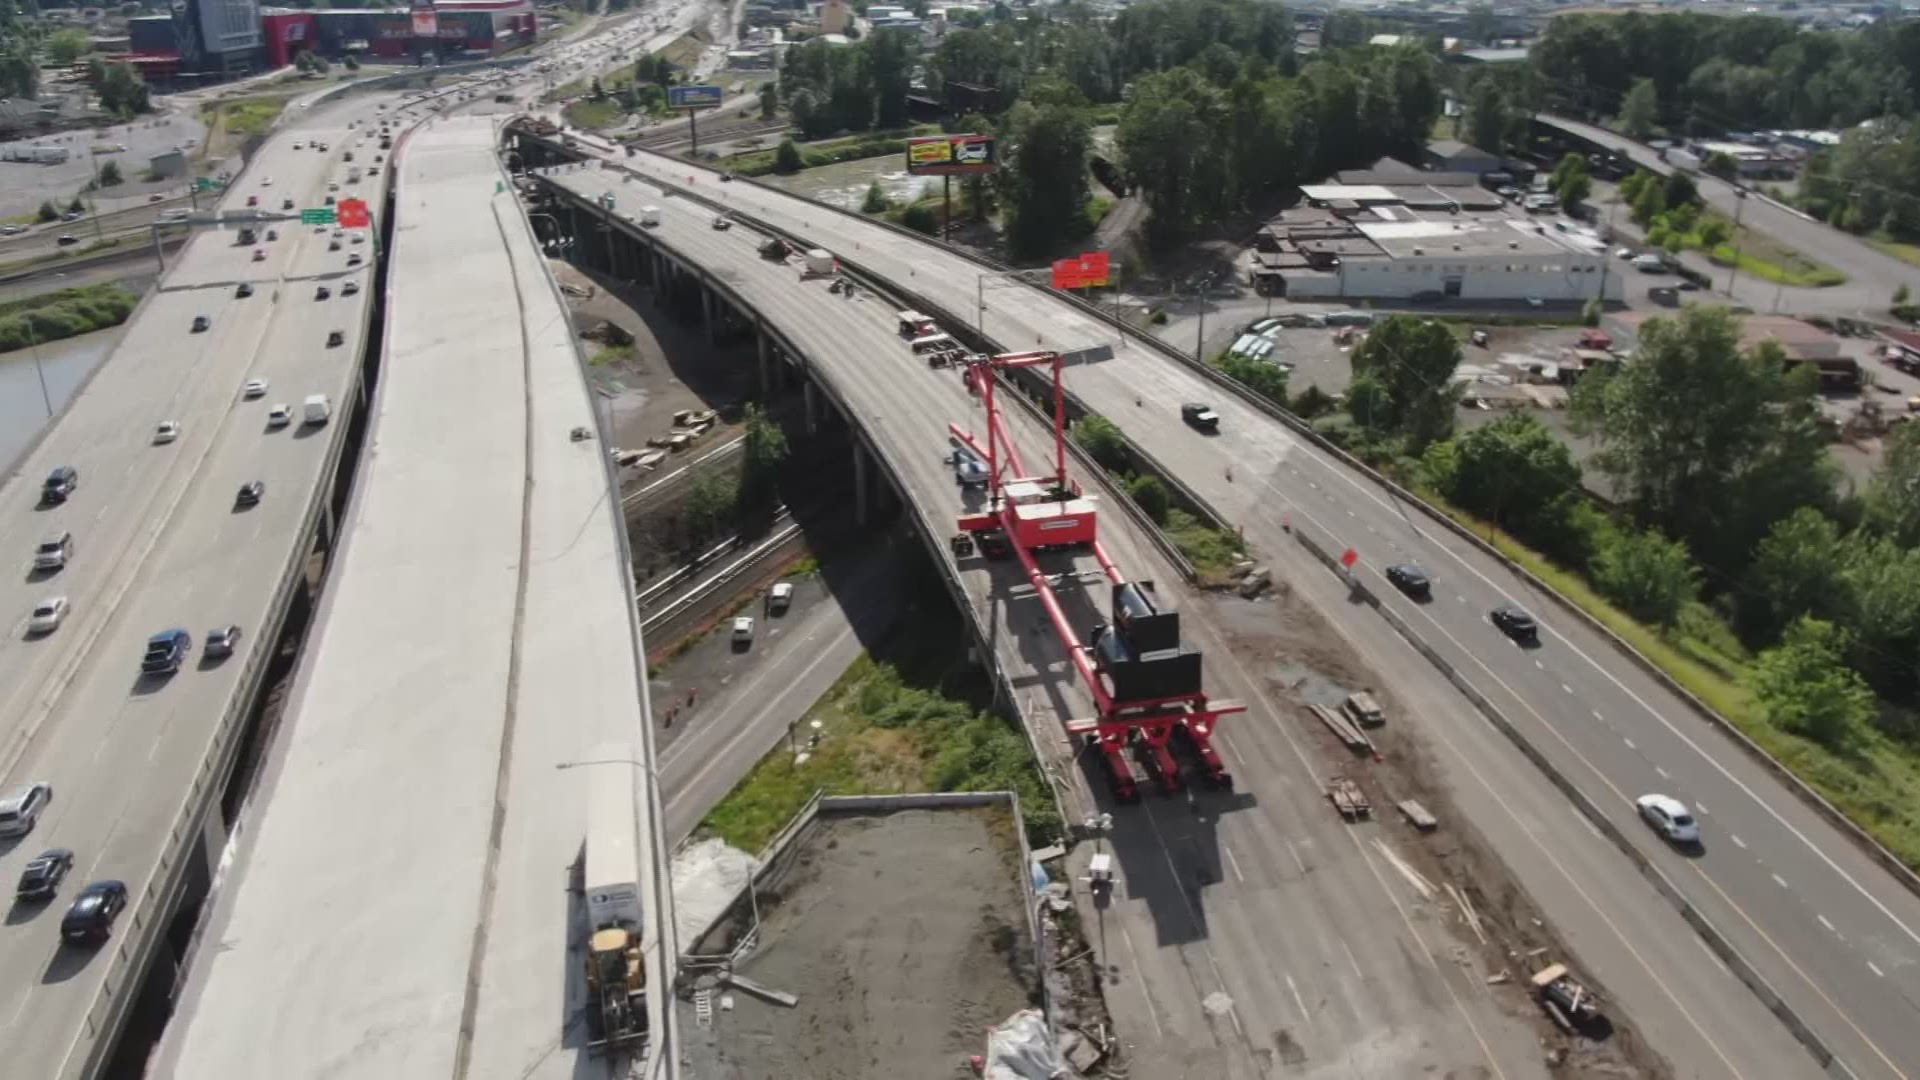 Starting this weekend, June 18-20, crews will begin shifting a lane of southbound traffic onto a new bridge over the Puyallup River.